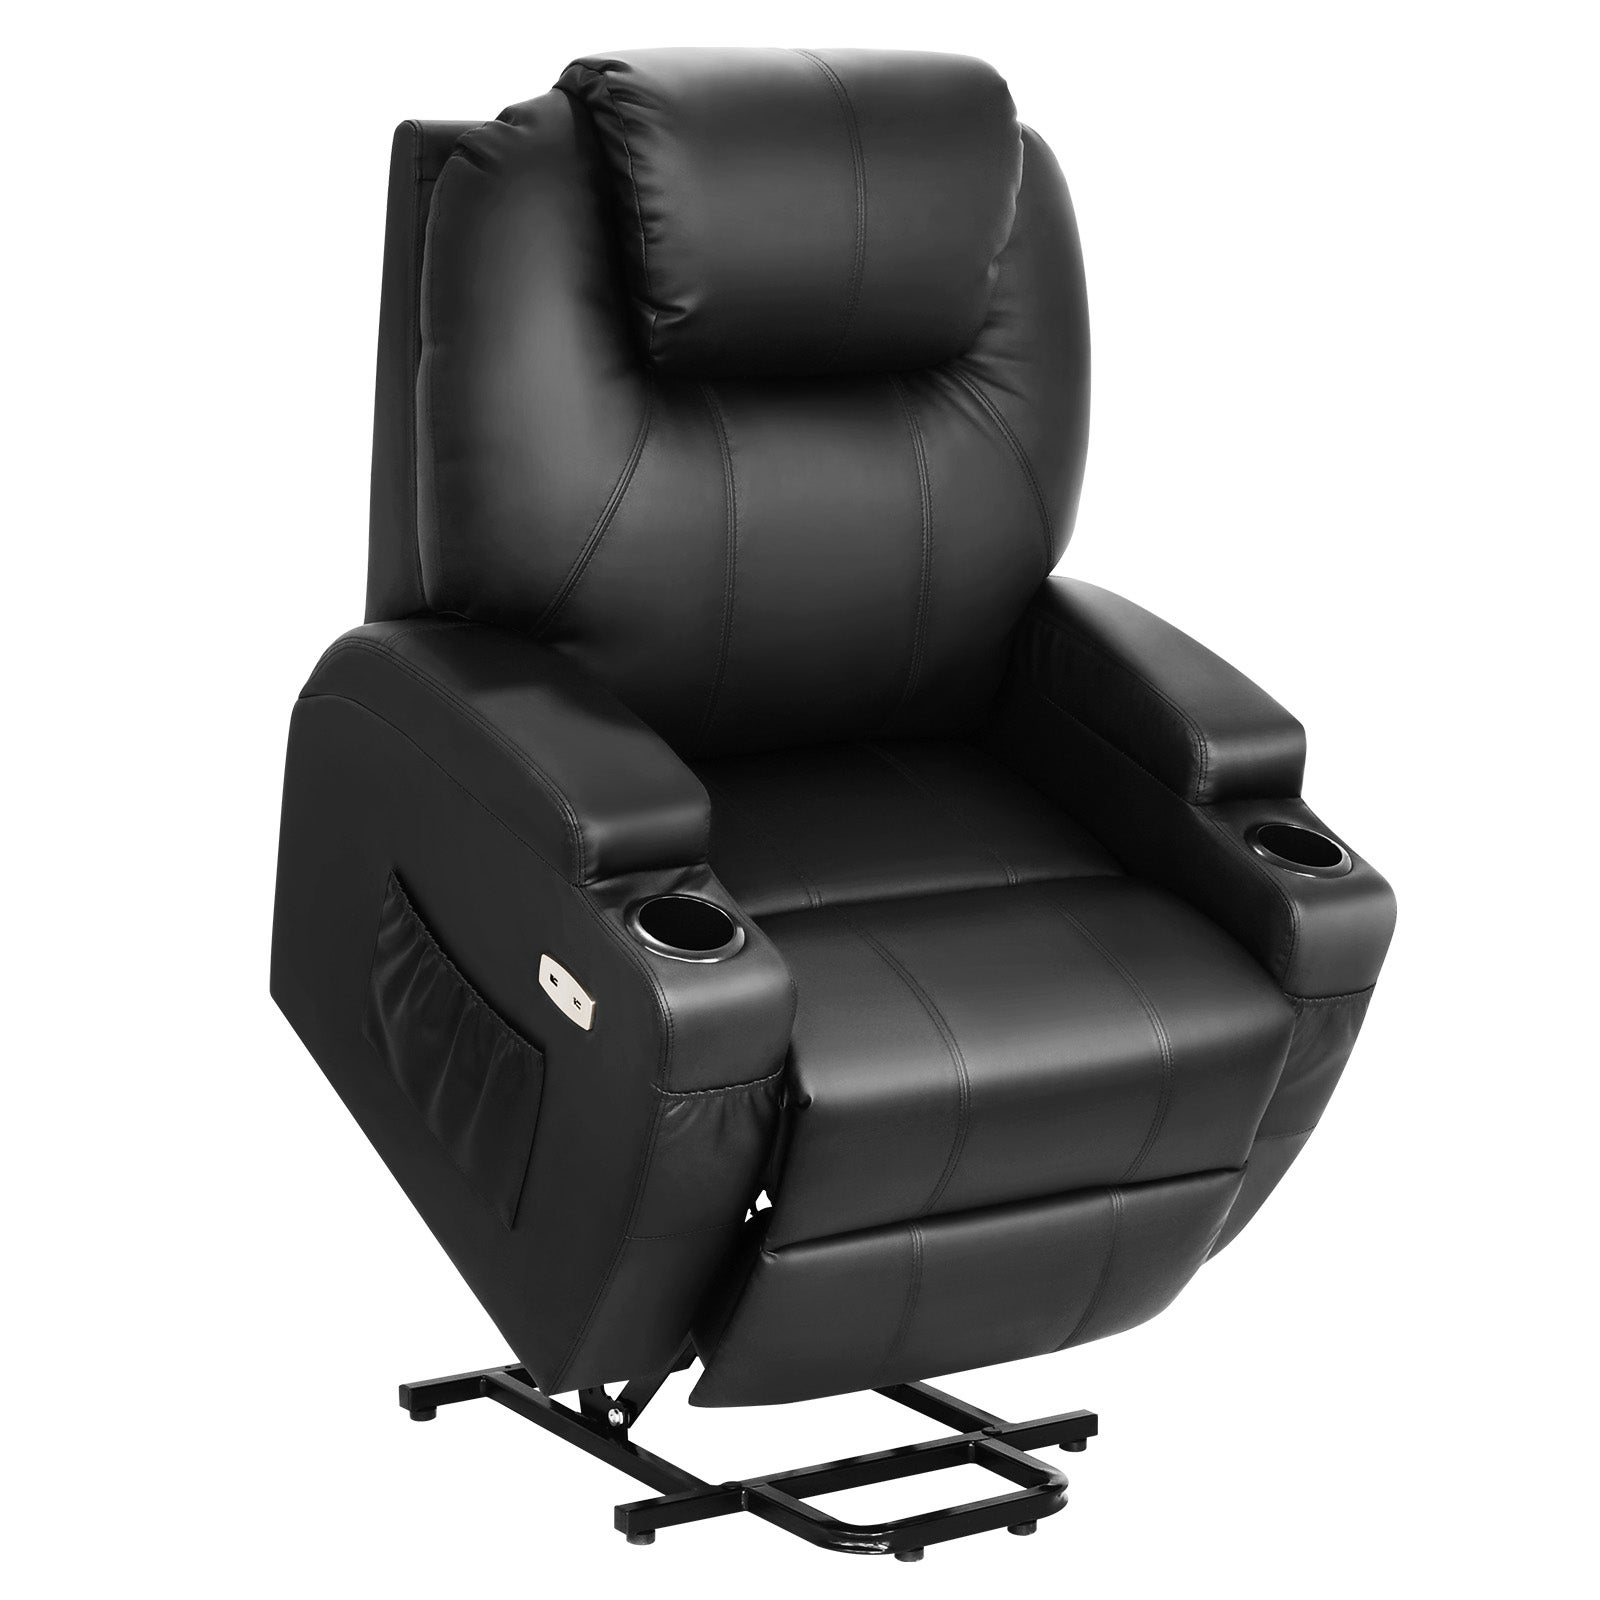 Electric Lift Recliner Massage Chair Adjustable Heat with Remote Control, Two Cup Holders, and Side Pockets(PU Leather, 45-140 Degrees, Black)